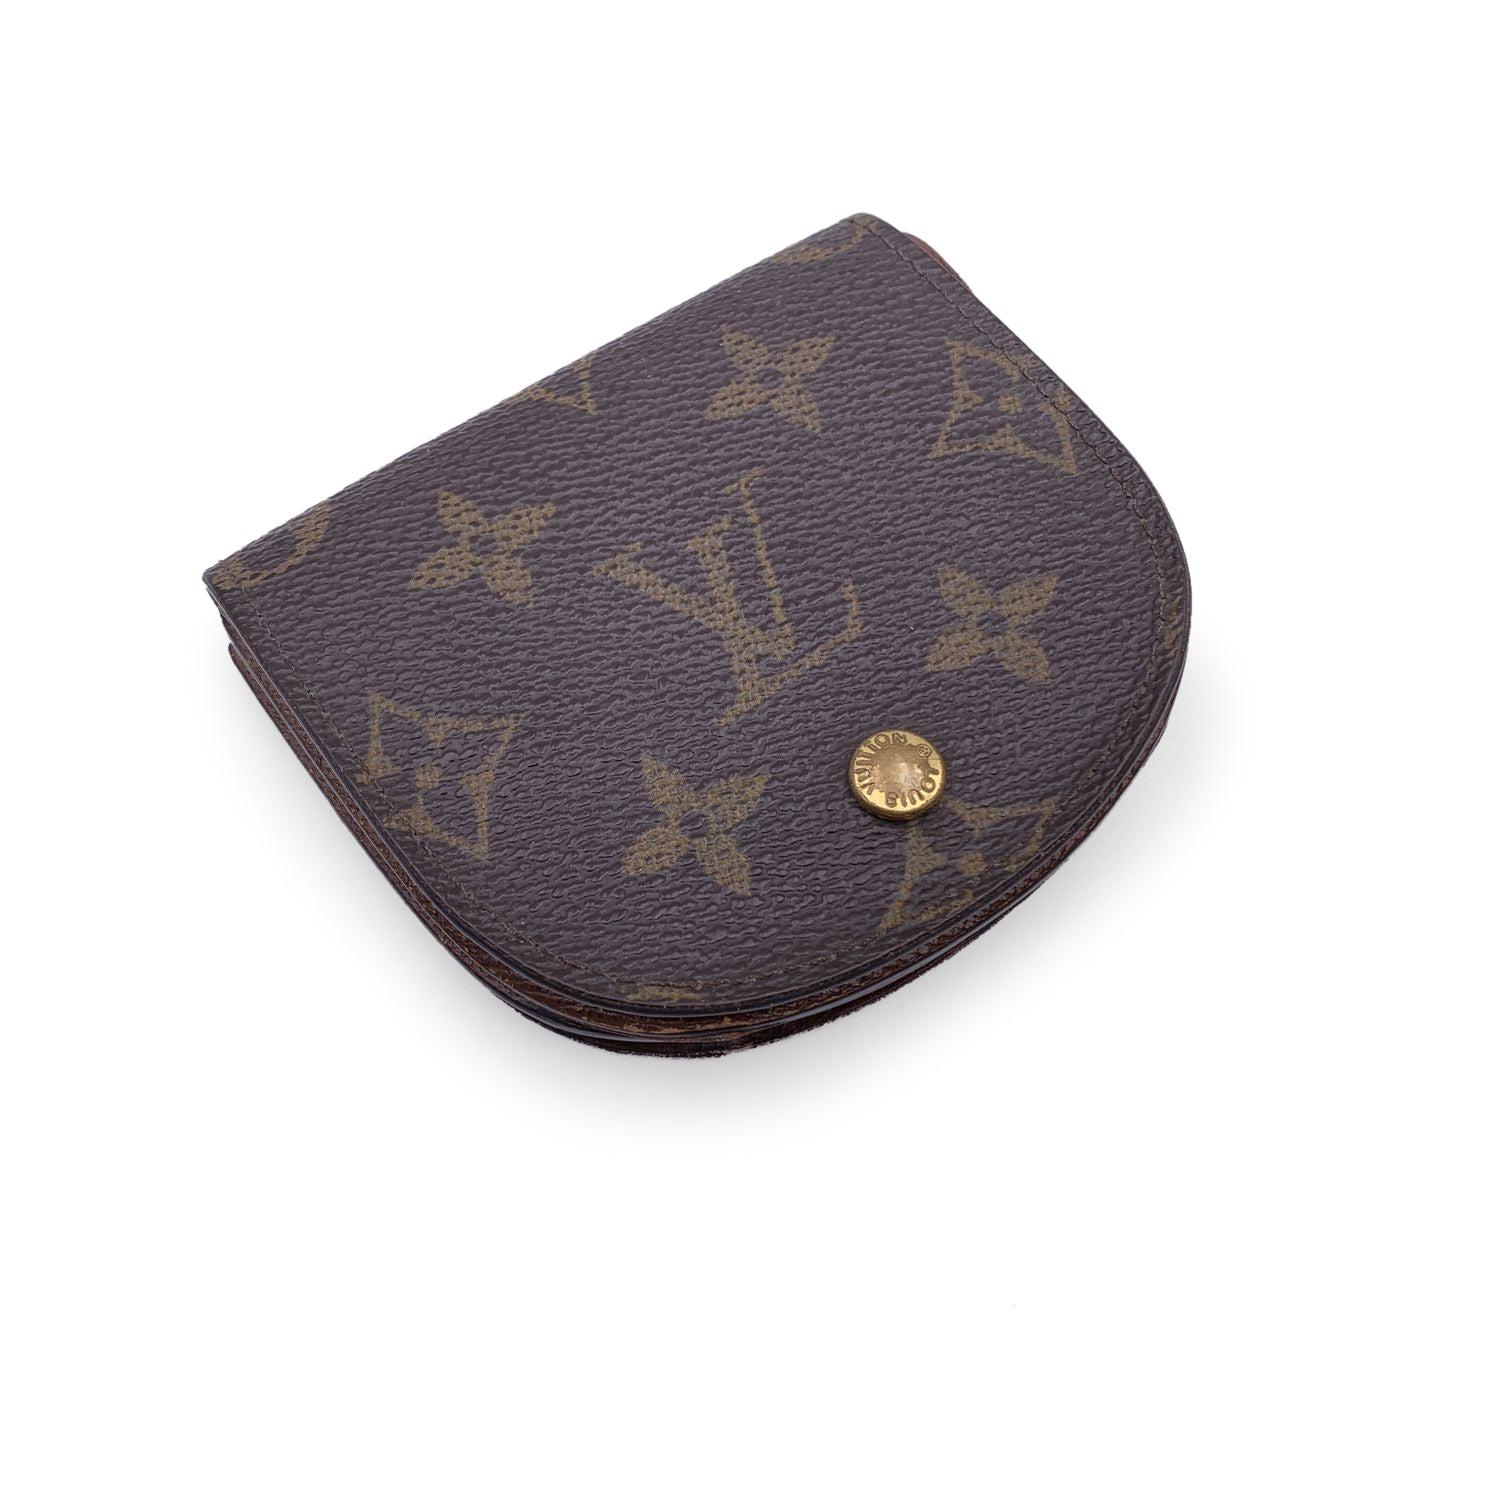 Louis Vuitton coin purse, mod. M61970. Monogram canvas. Cross grain leather lining. Flap and press stud closure. 2 compartments and 1 section with flap. 'Louis Vuitton Paris - Made in France' embossed inside. Authenticity serial number embossed